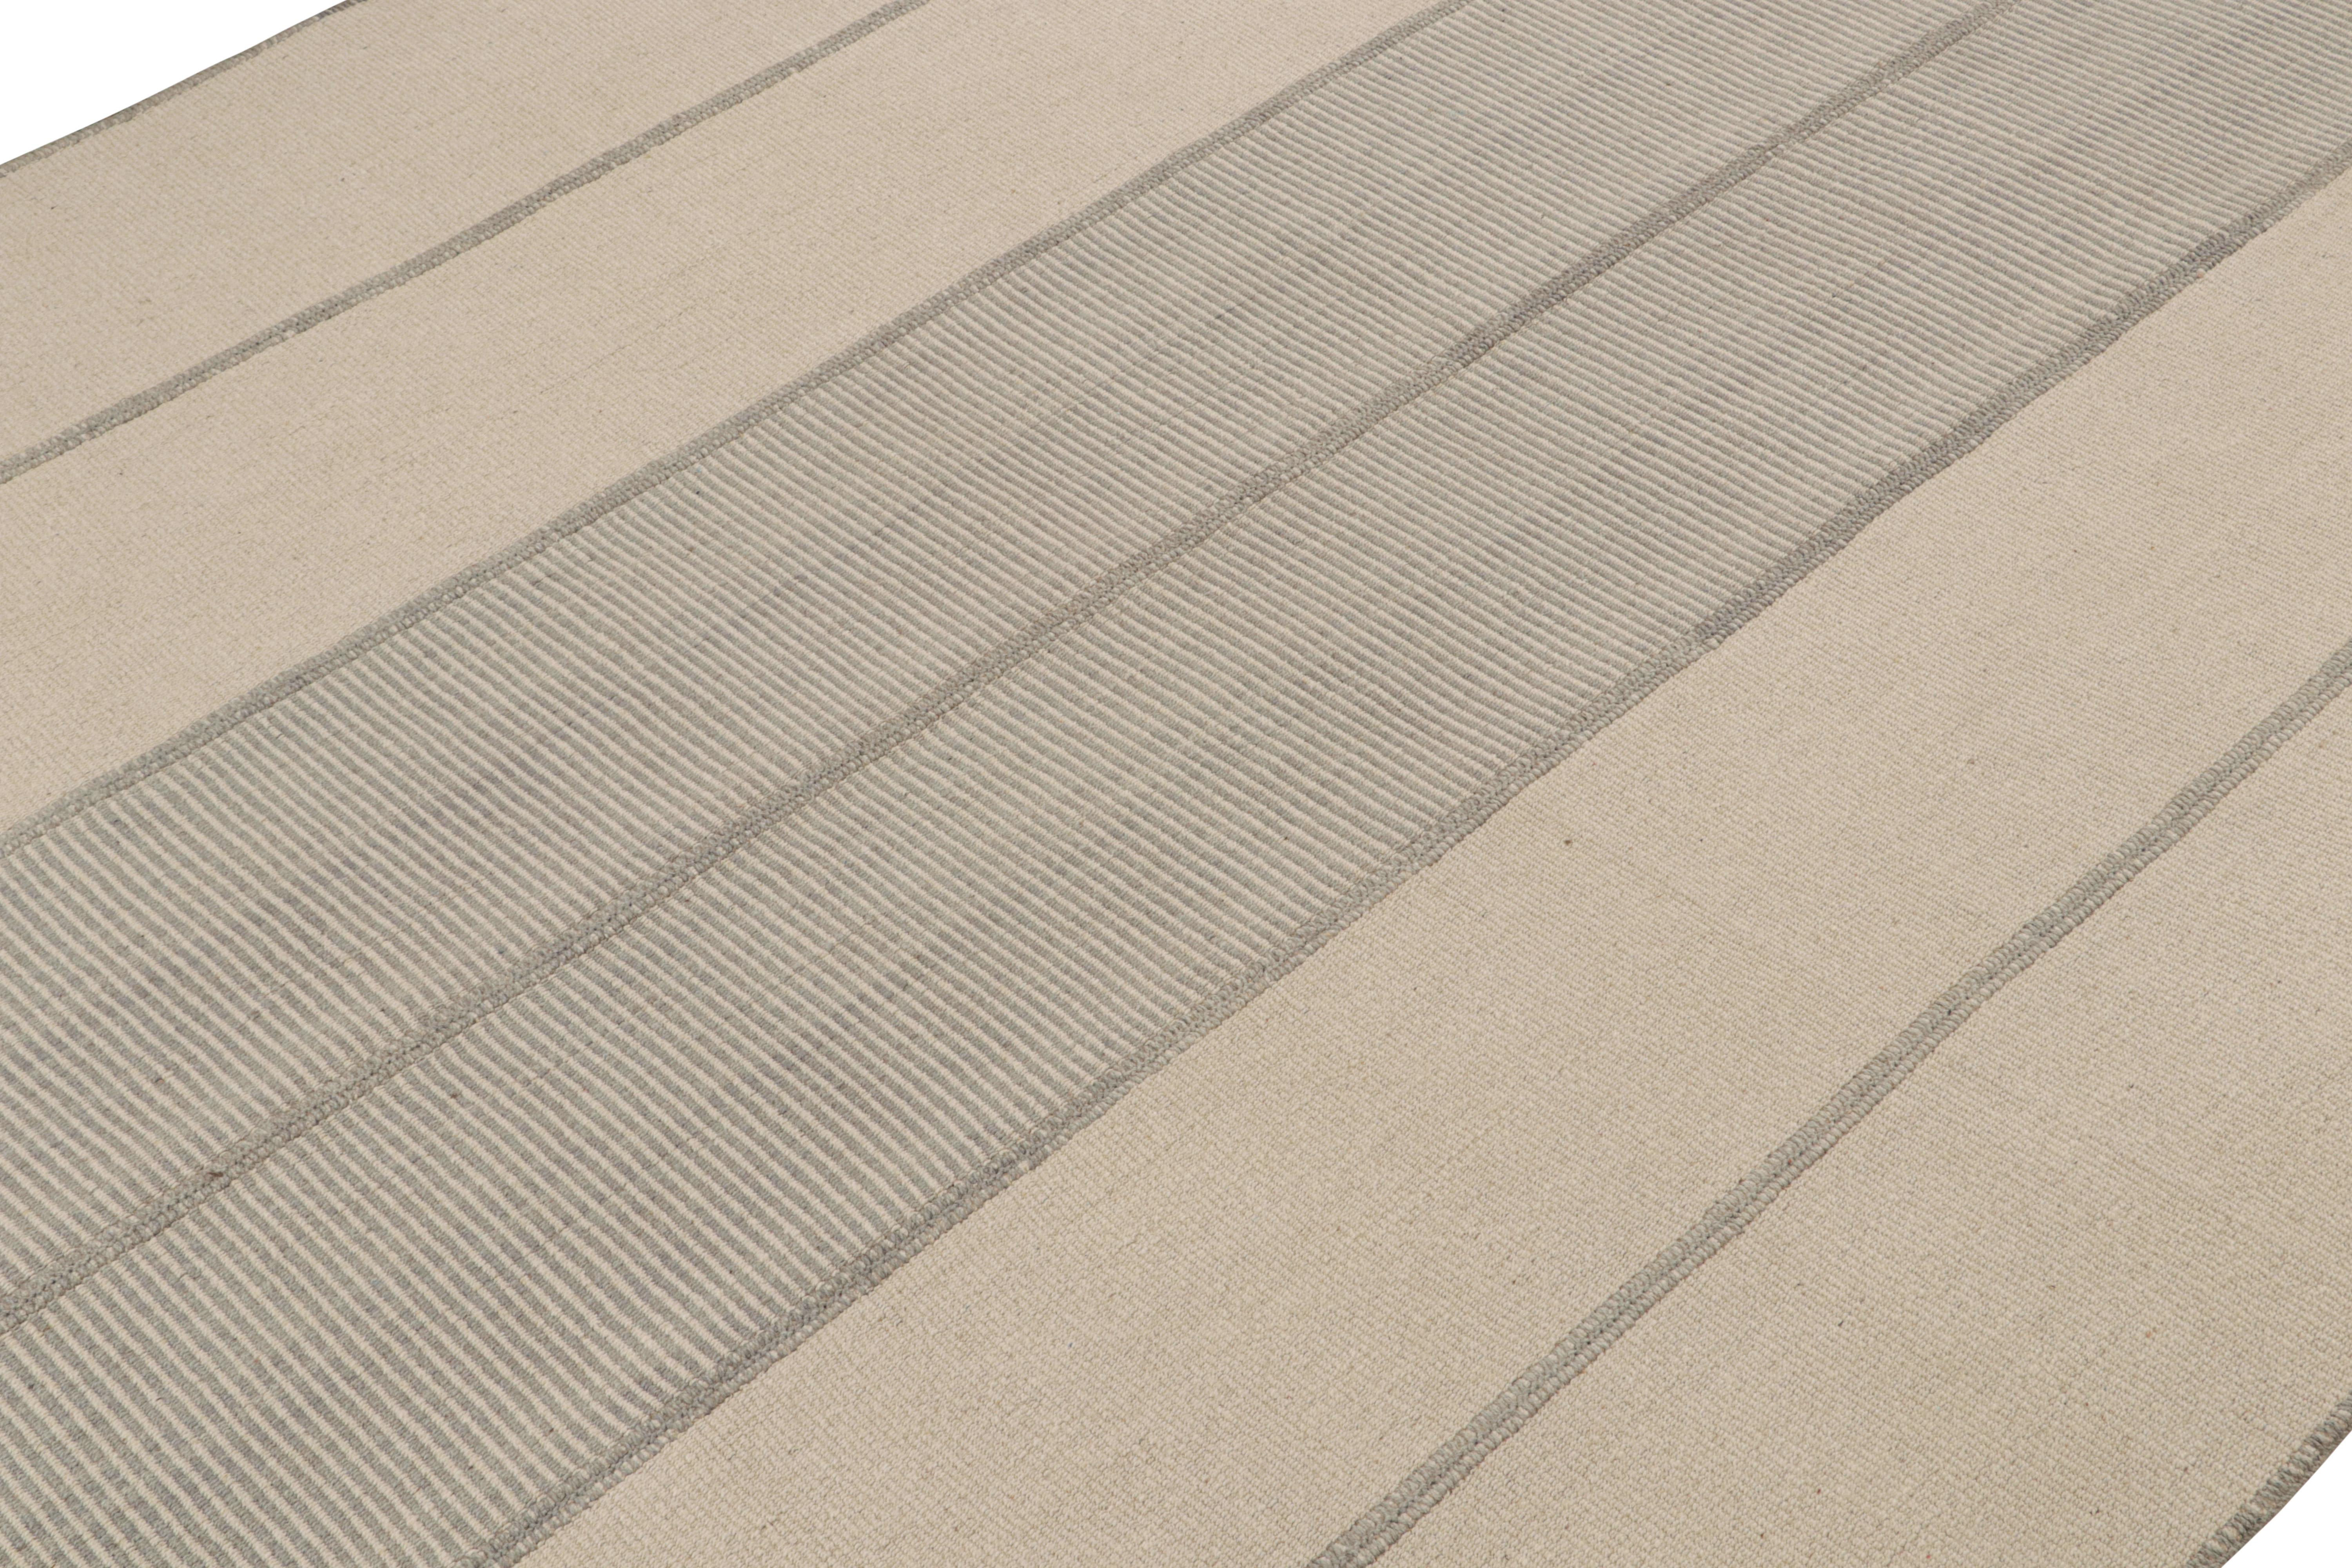 Handwoven in wool, a 10x15 Kilim from a bold new line of contemporary flatweaves by Rug & Kilim.

On the Design: 

Connoting a modern take on classic panel-weaving, our latest “Rez Kilim” enjoys beige & Gray tones. Keen eyes will admire how this